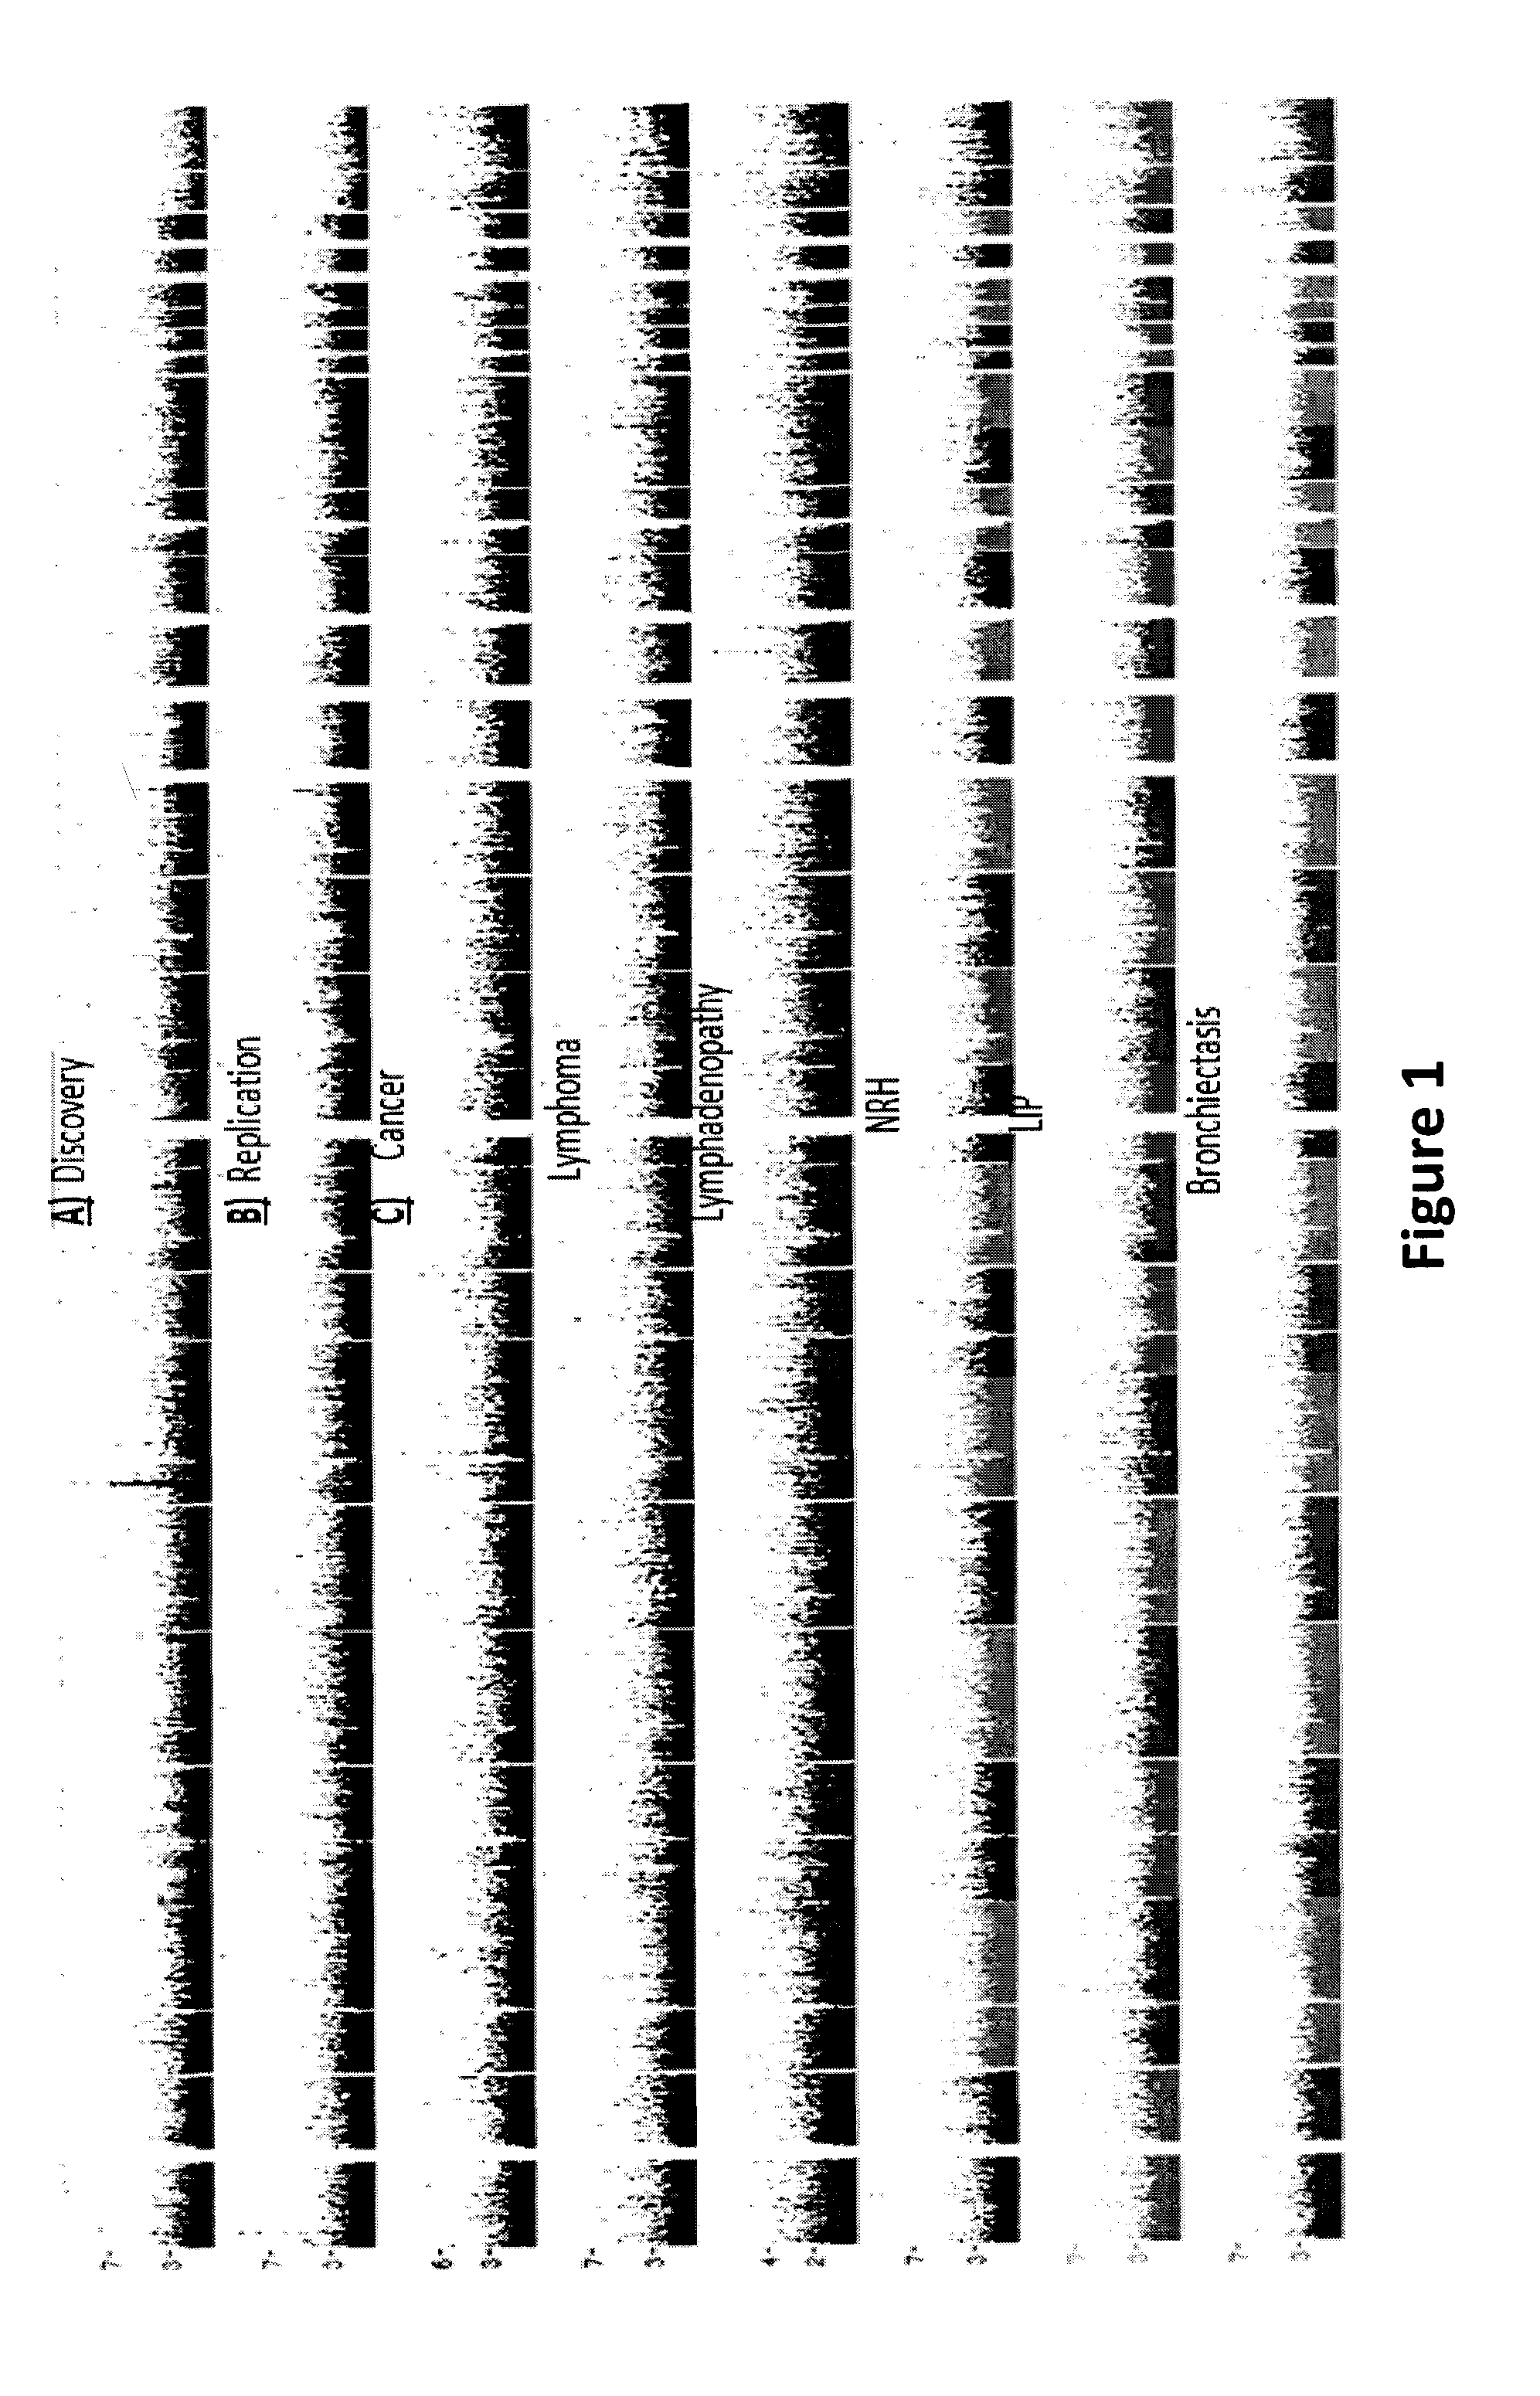 Common and Rare Genetic Variations Associated with Common Variable Immunodeficiency (CVID) and Methods of Use Thereof for the Treatment and Diagnosis of the Same